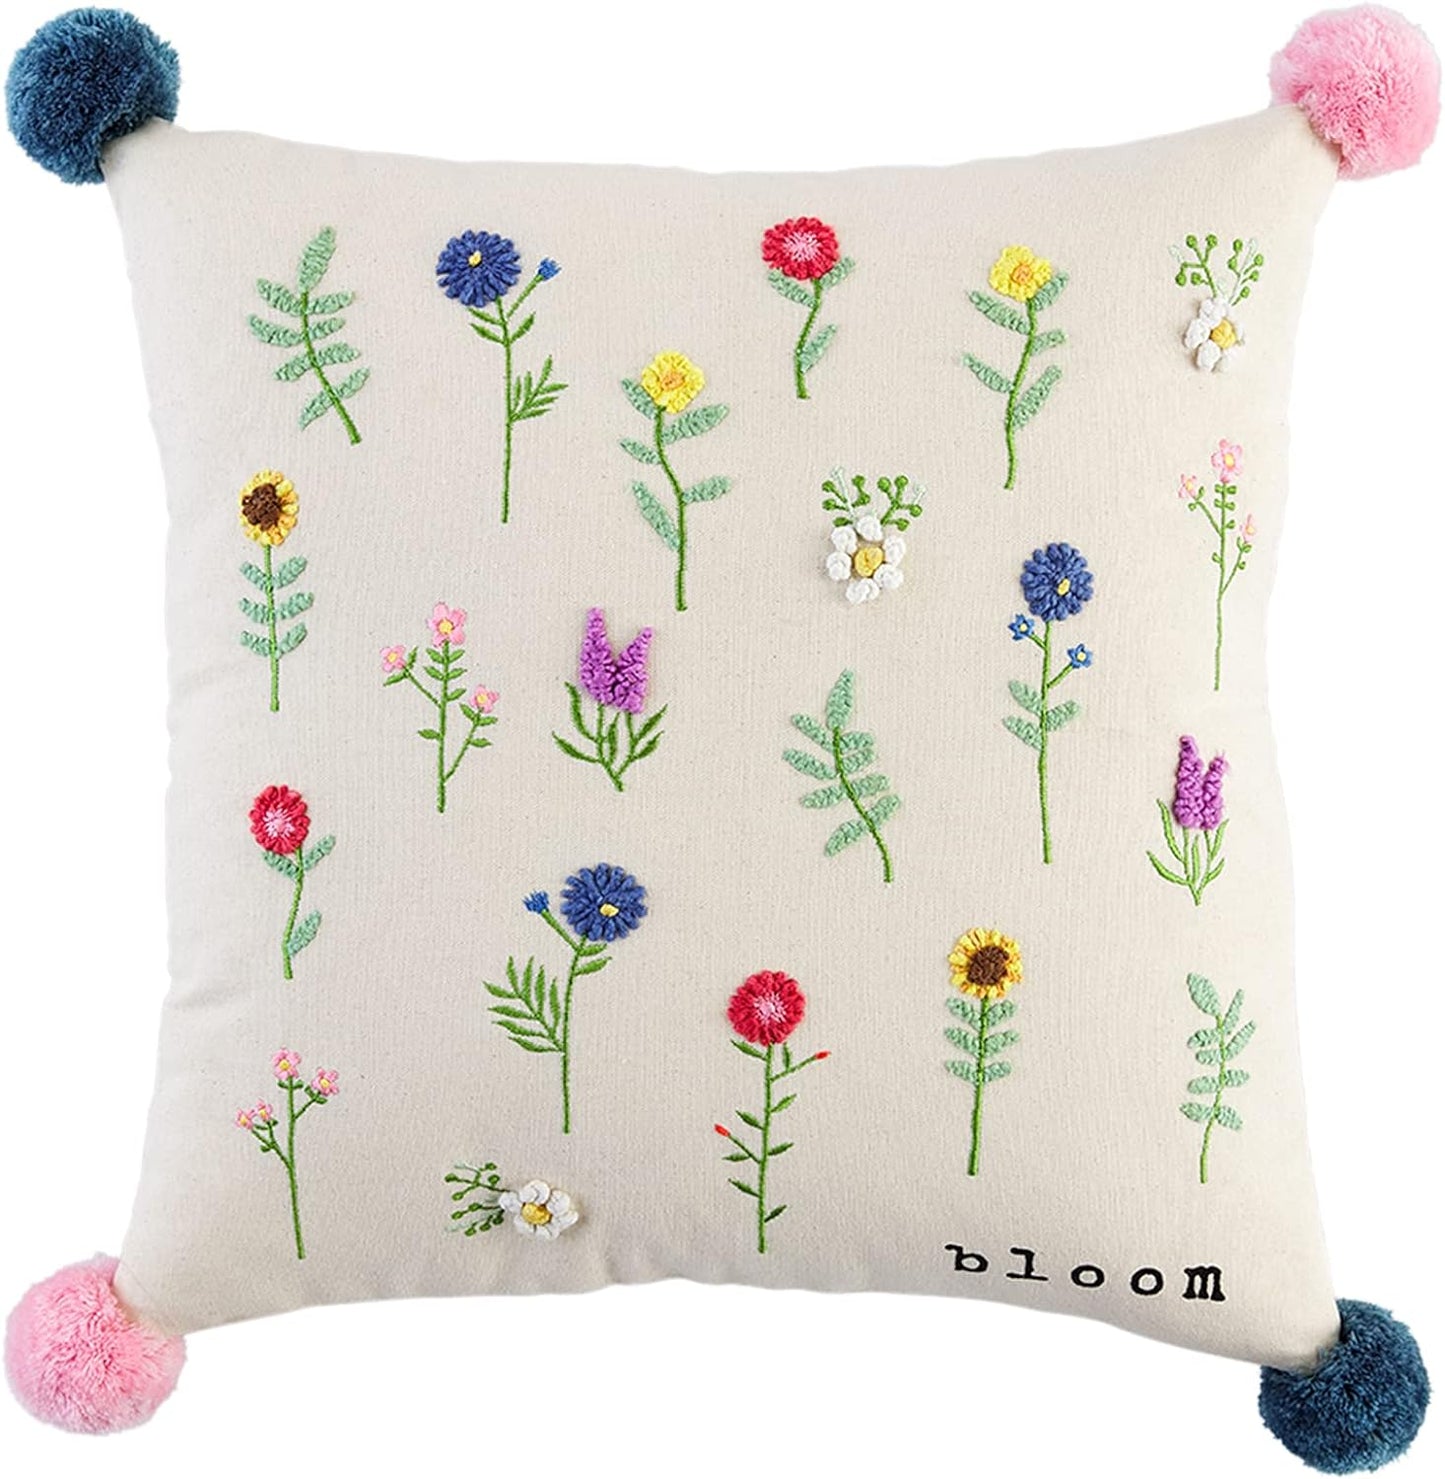 pillow with all-over pattern of embroidered flowers and "bloom" printed in the corner and pink and blue corner poms.